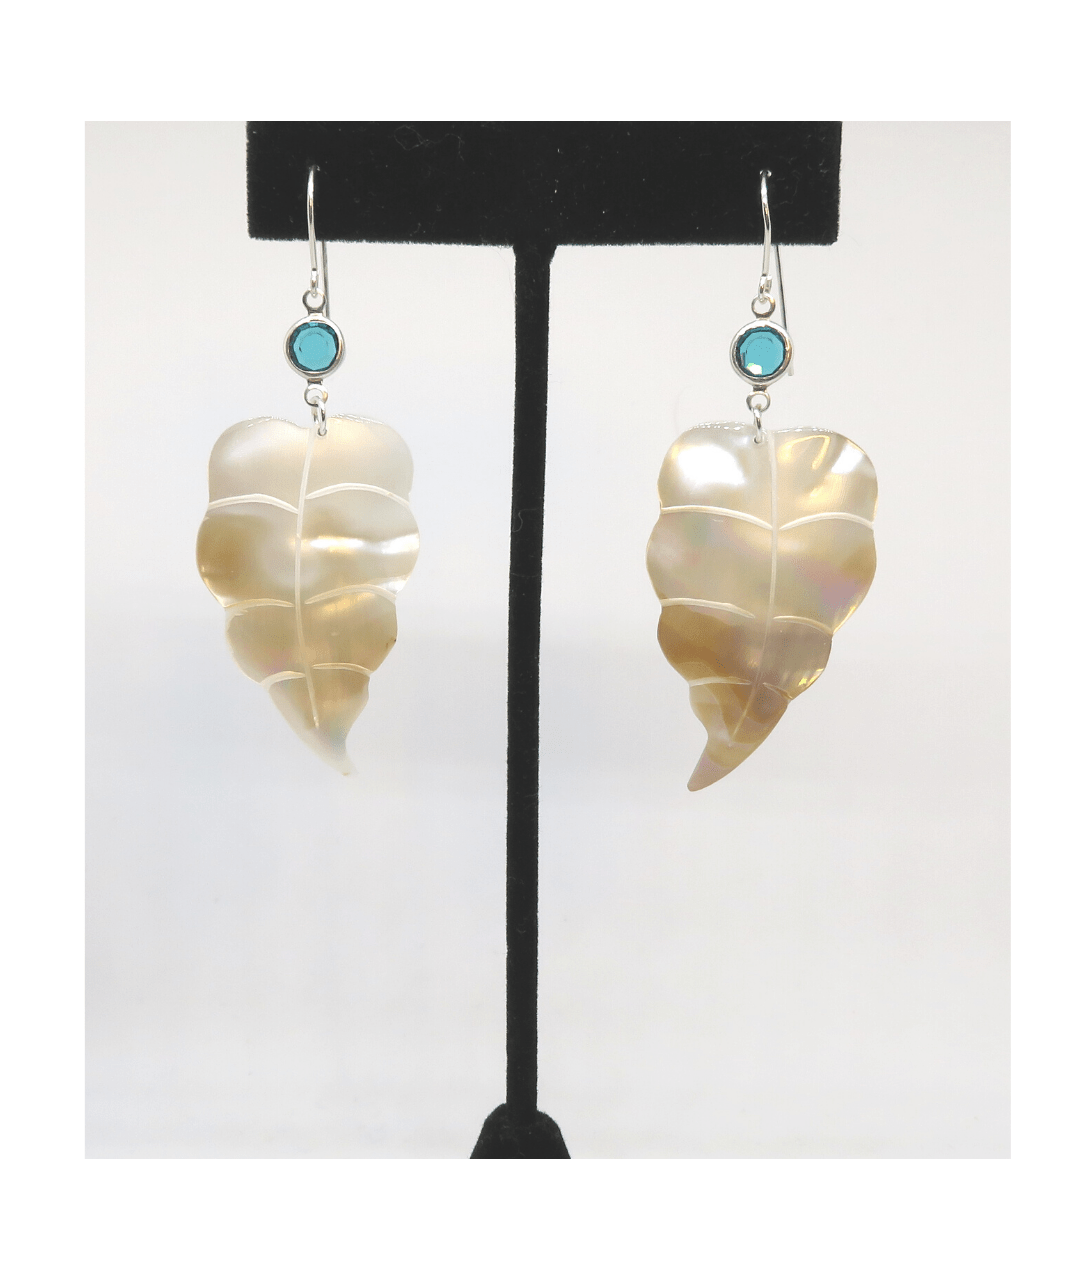 Carved Mother-of-Pearl Leaf Shape in Golden, White Colors with Swarovski Crystal Sterling Silver Earrings Approx. 2 1/2" L X 1" W